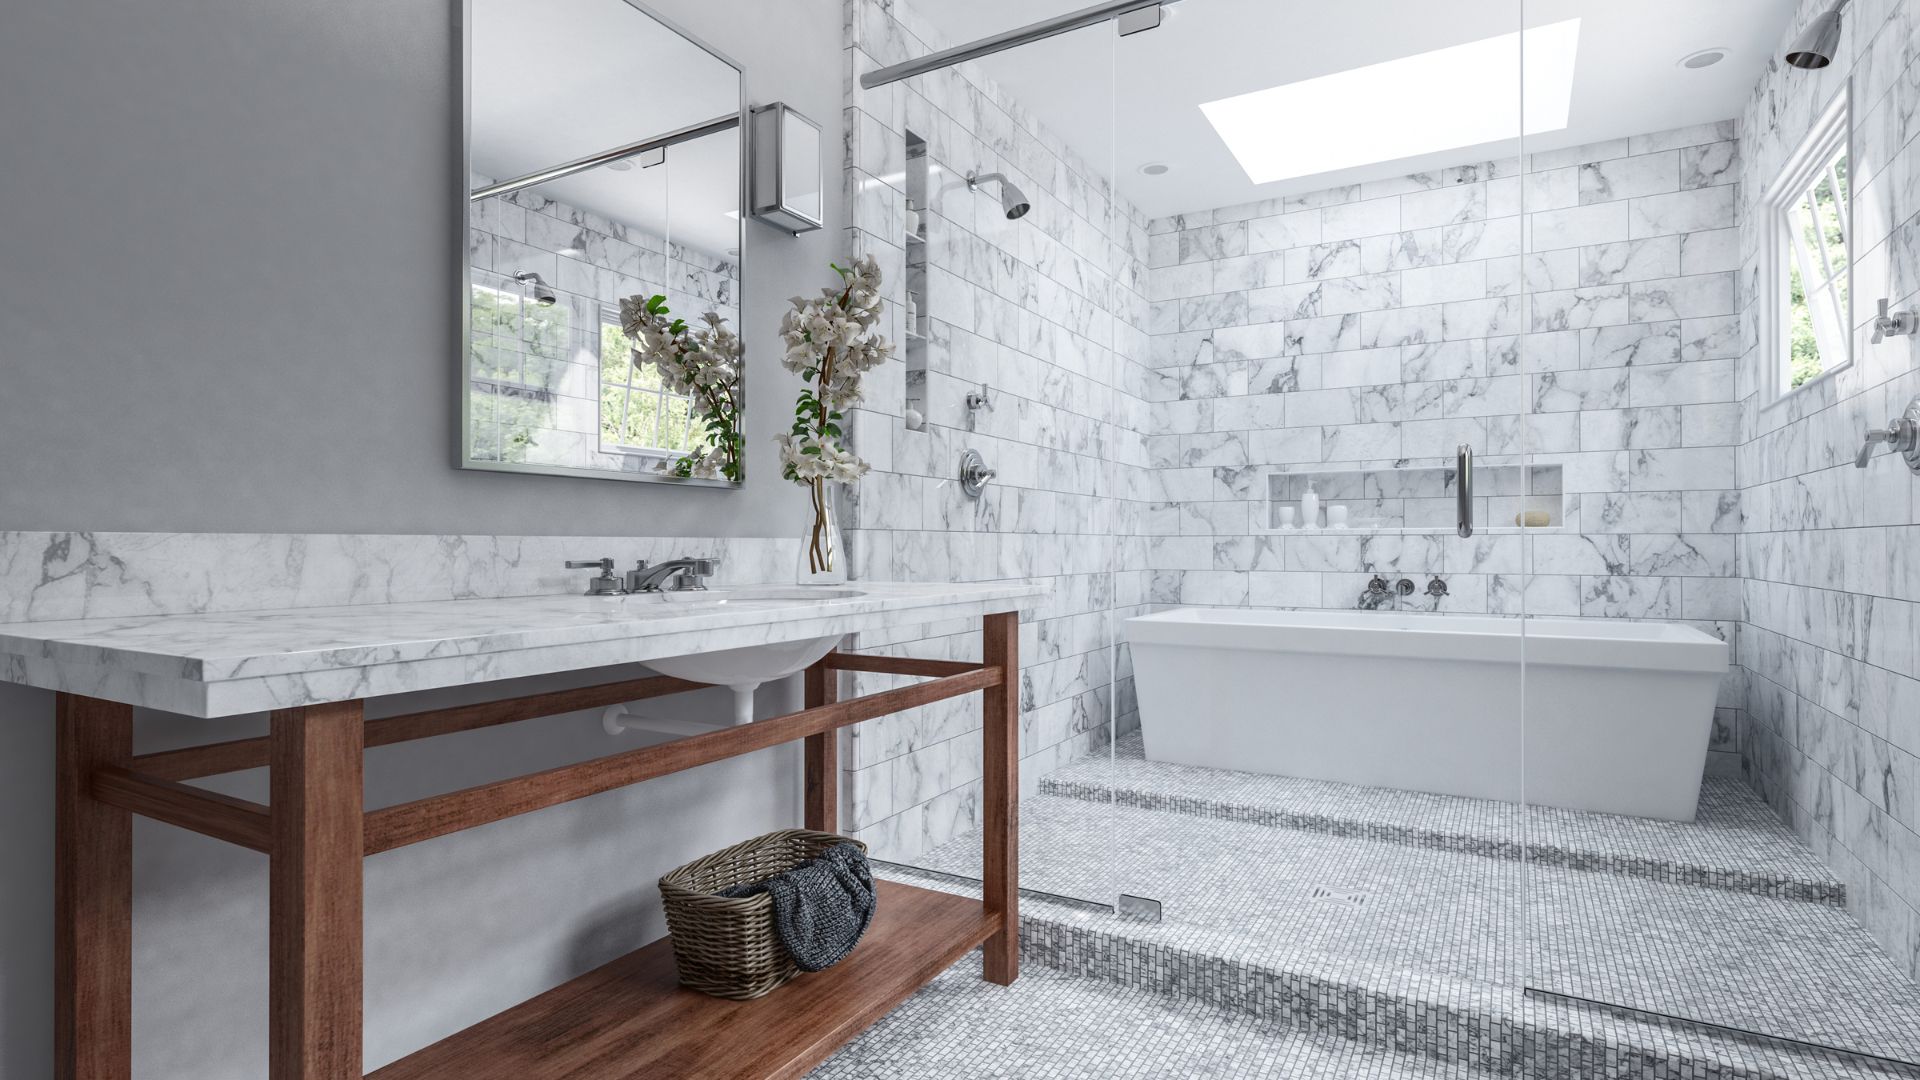 Sleek style bathroom with tiles surround shower and tub